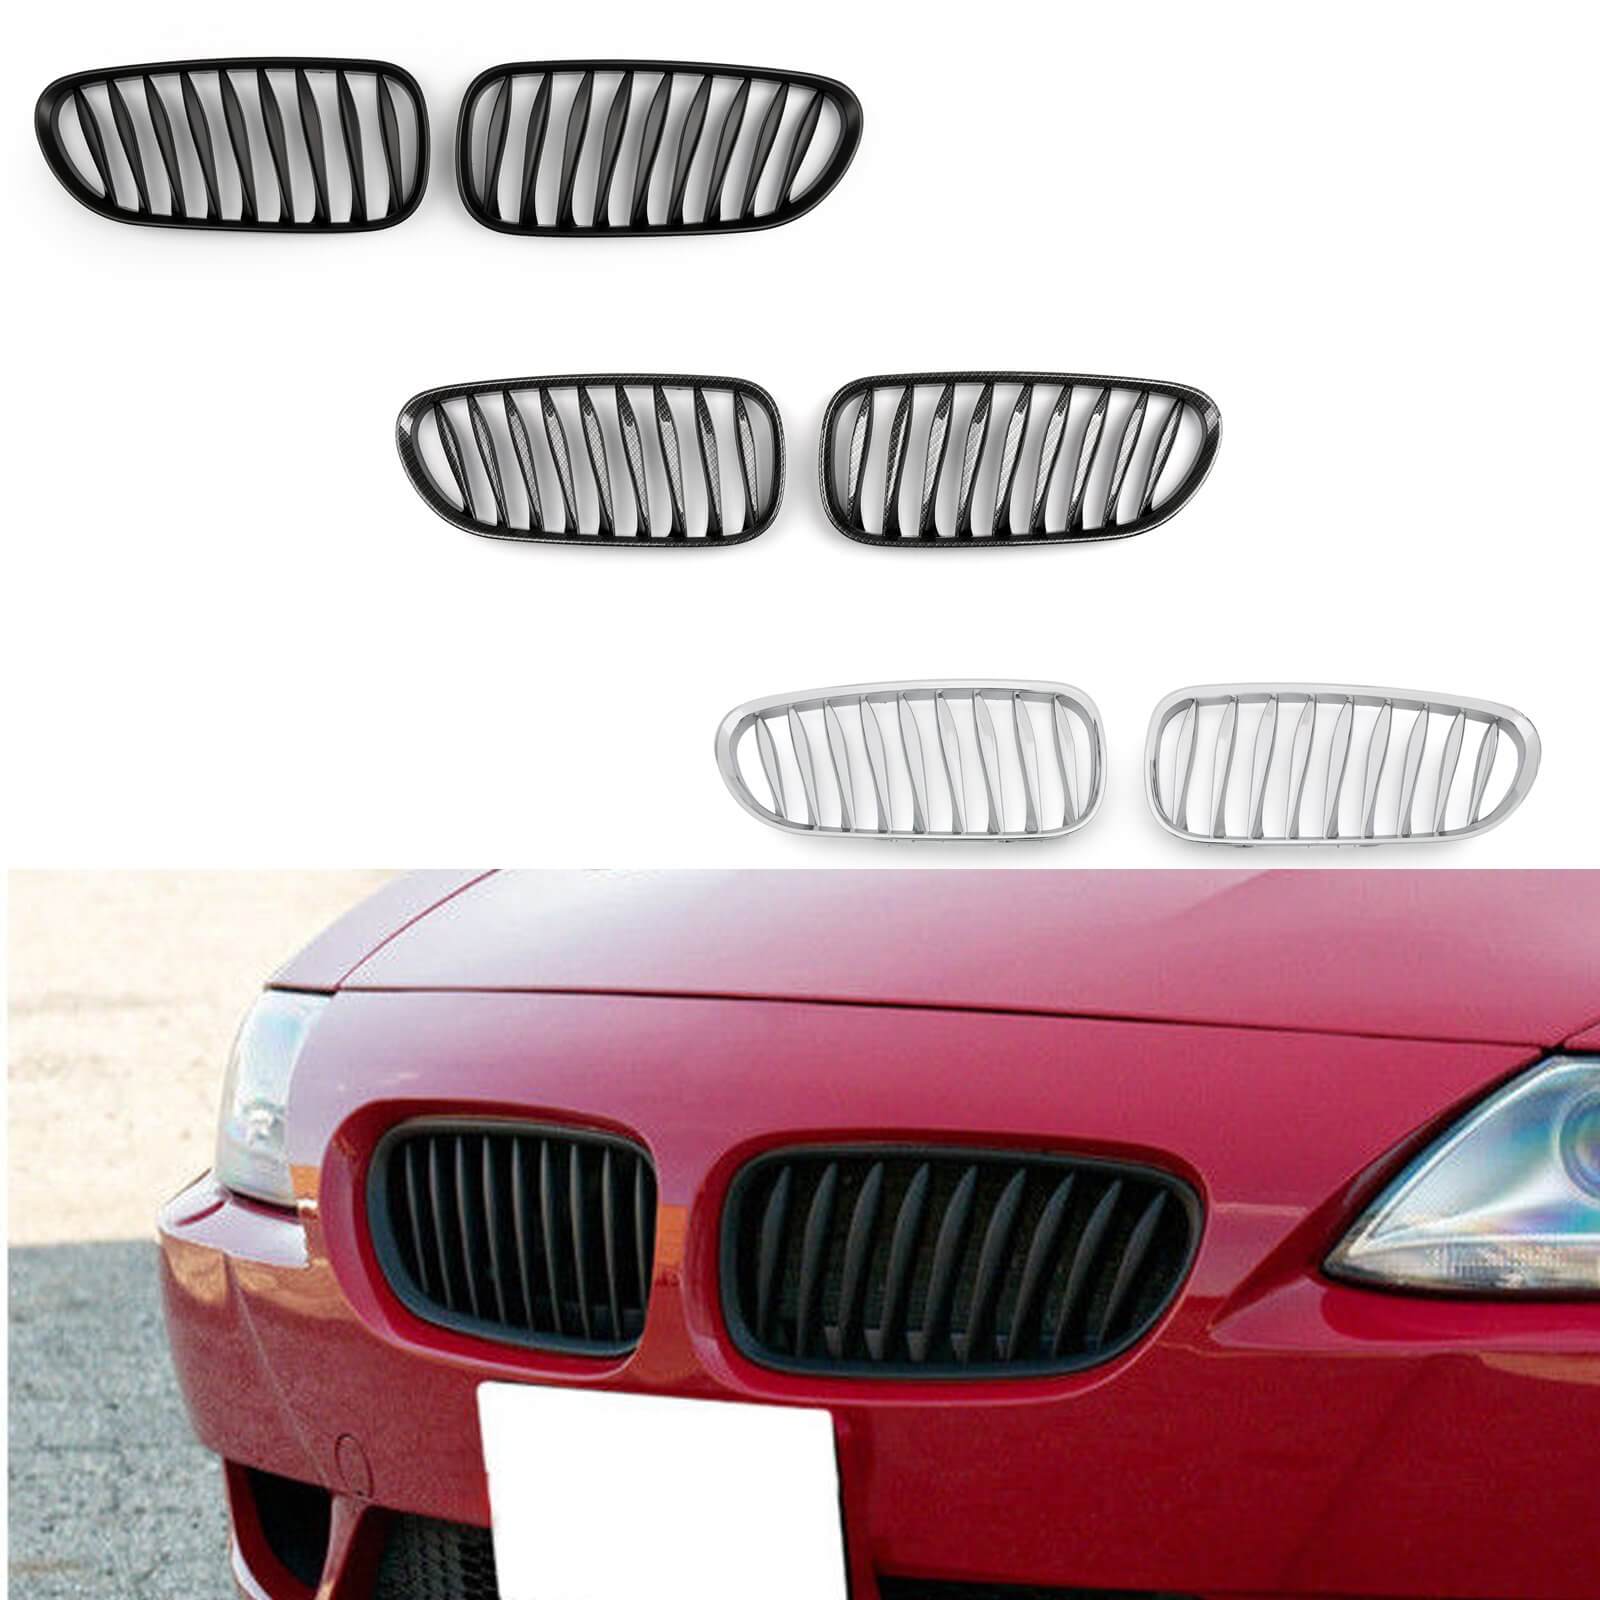 BMW Grille 2x Front Bumper Sport Kidney Grill For BMW Z4 E85 E86 2003-2008